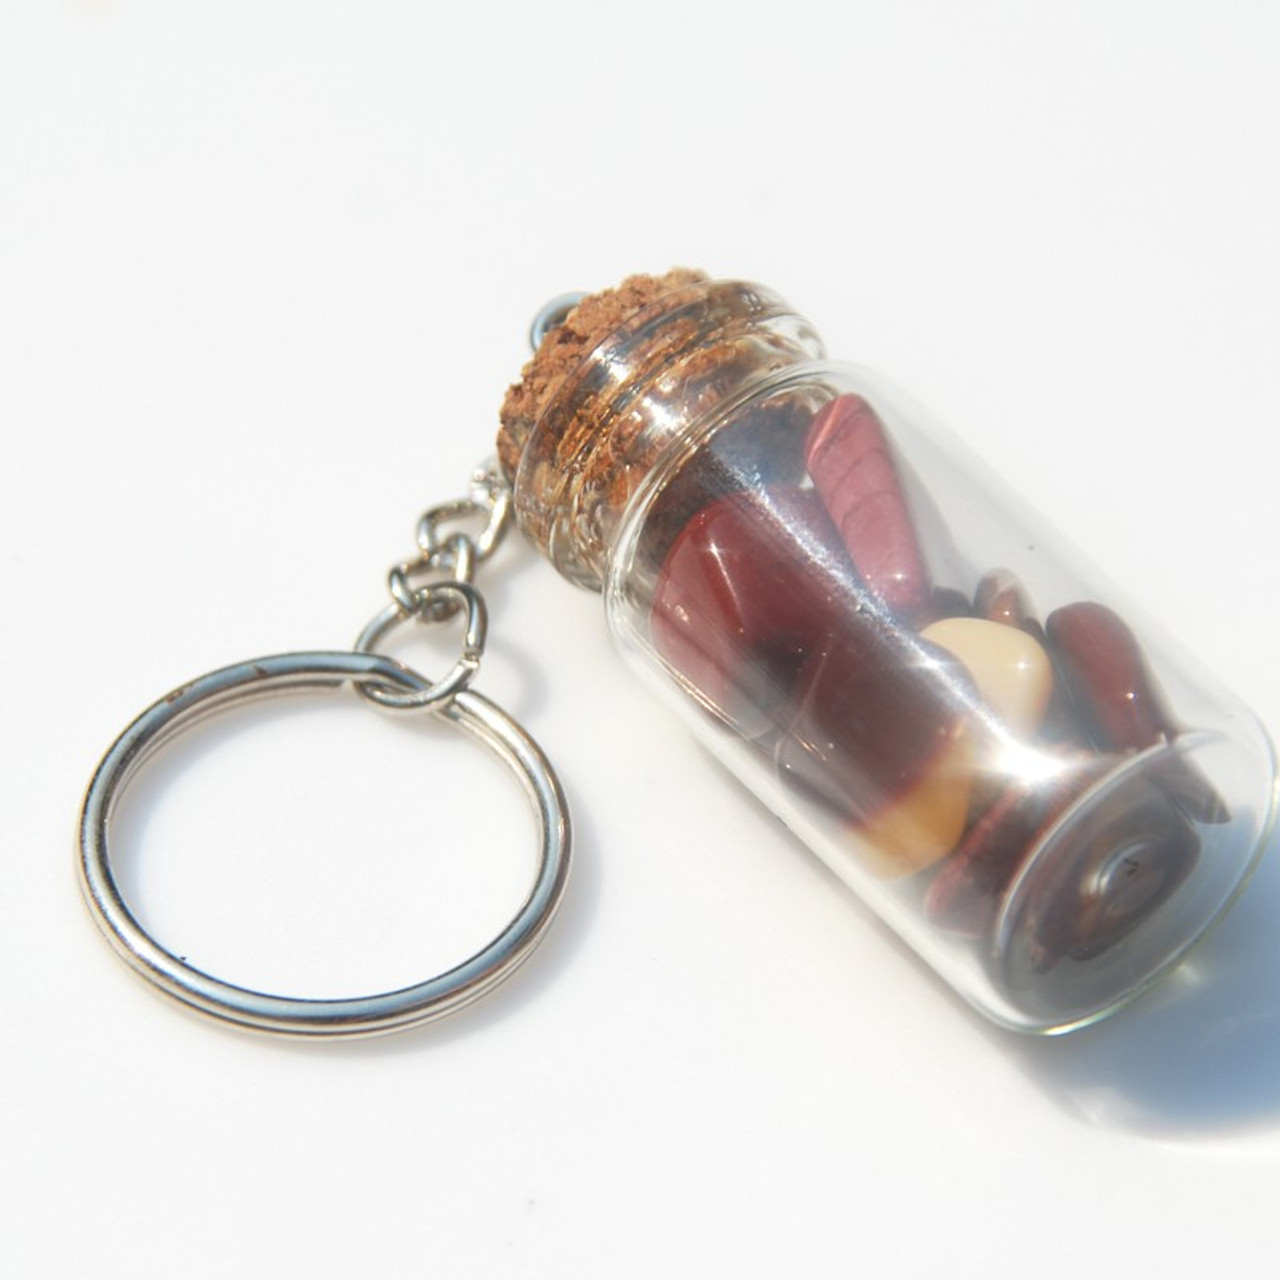 Mookaite Jasper Stones in a Glass Vial Keychain - Made to Order